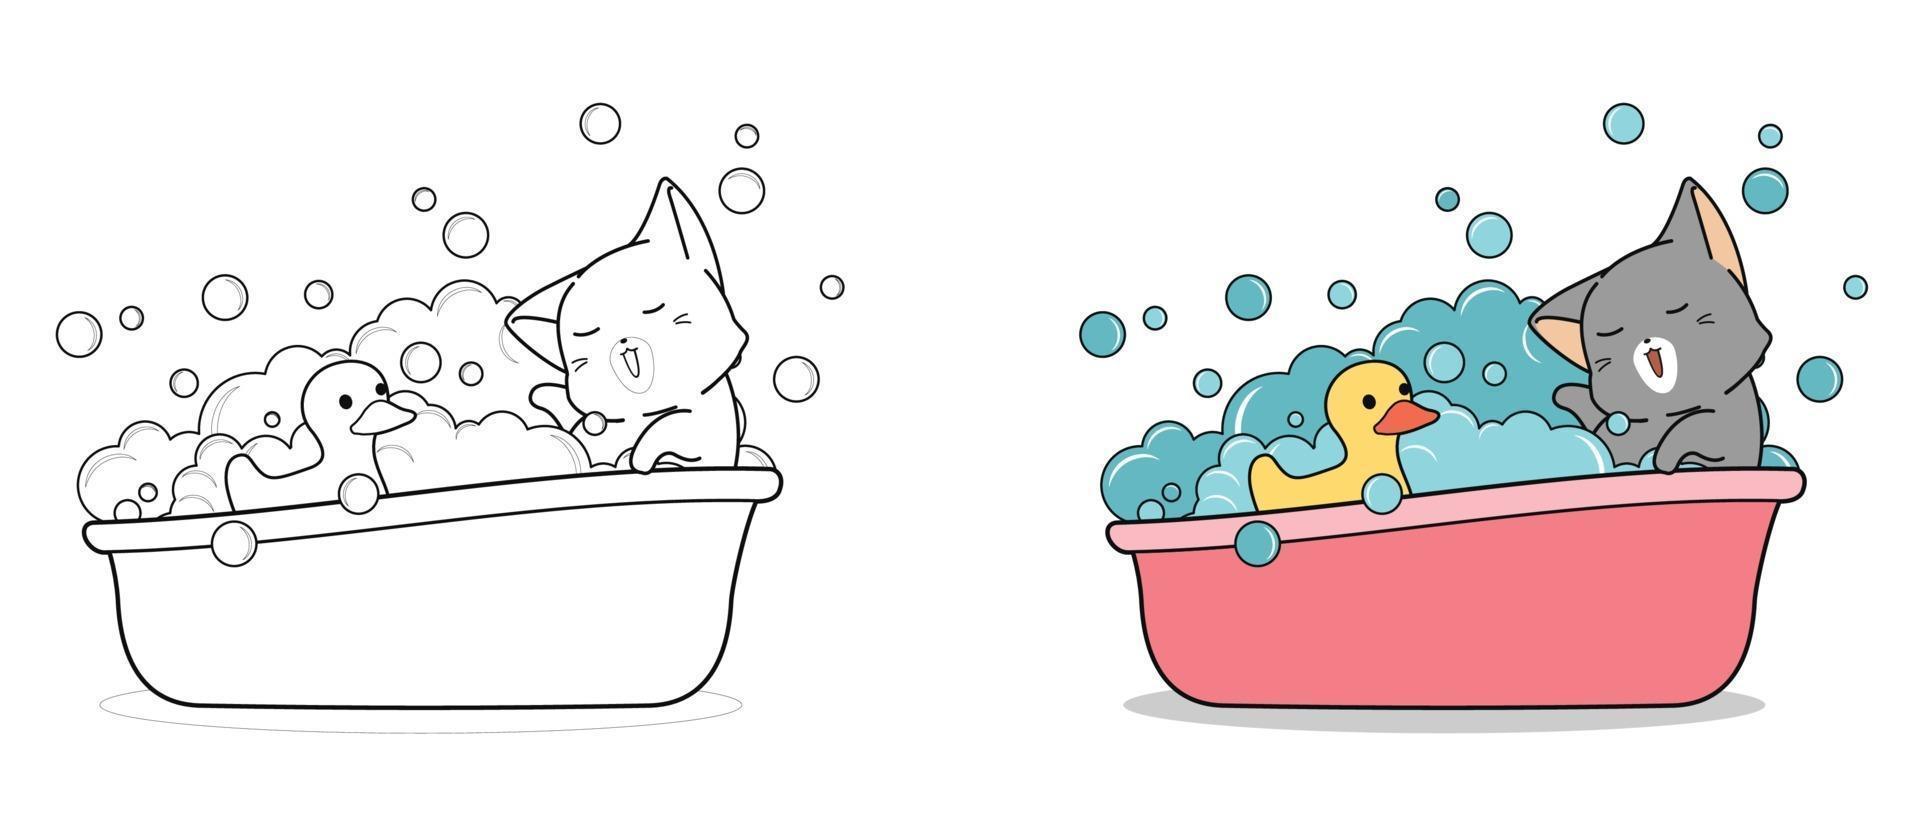 Adorable cat is bathing with ducky cartoon coloring page for kids vector